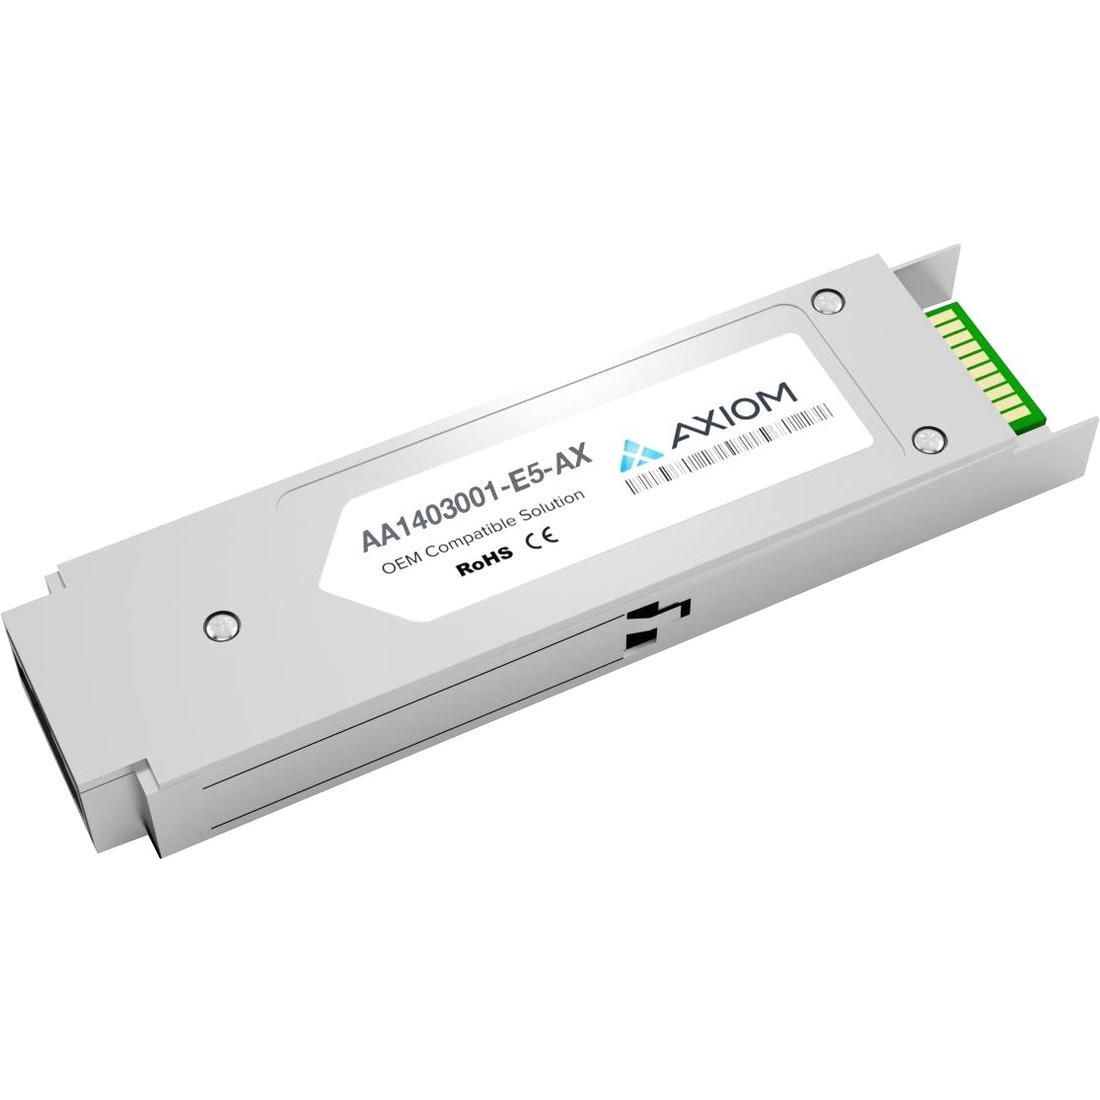 AXIOM 10GBASE-LR XFP TRANSCEIVER FOR NORTEL 